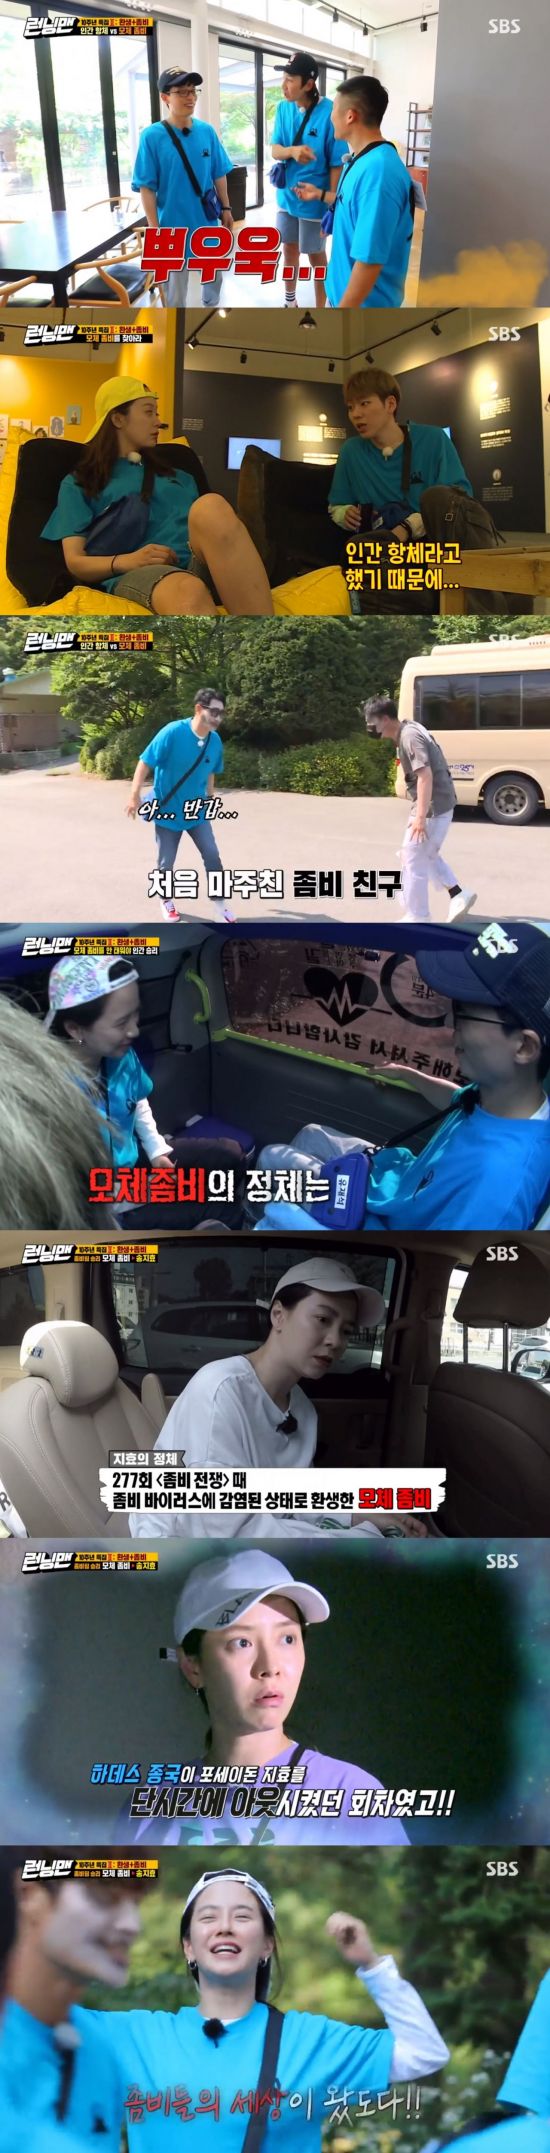 On SBS Running Man on the afternoon of the 5th, Song Ji-hyo played a big role with mother Zombie 2: The Dead are Among Us, and Zombie 2: The Dead are Among Us team led to victory.On this day, Running Man appeared as a guest by Zico, Sunmi, Jo Se-ho and Lee Do-hyun.This Running Man, which is decorated with a race that viewers want to see again on the 10th anniversary of the broadcast, was conducted as a 2020 Dead Again Special with Dead Again in different races.Members meet Zico, Lee Do-hyun and Jo Se-ho while heading to Dead Again camp under the guidance of guide Sunmi.And during the meal, sirens rang as Zombie 2: The Dead are Among Us were raided by a sudden raid.In the safety zone, members learned information about Zombie 2: The Dead are Among Us, and went into Zombie 2: The Dead are Among Us Race.Zombie 2: The Dead are Among Us, sensitive to smell and hearing, is a situation that can be avoided for a while with hand disinfectant.Zombie 2: The Dead are Among Us is also informed that it is divided into lower/upper Zombie 2: The Dead are Among Us.Lower Zombie 2: The Dead are Among Us is immediately recognizable, but the higher Zombie 2: The Dead are Among Us was no different from humans because they did not dress up.Zombie 2: The Dead are Among Us The ticket to the judgment could also find Zombie 2: The Dead are Among Us hiding in humans.In the meantime, Ji Suk-jin failed to avoid the attack of Zombie 2: The Dead are Among Us outside the safety zone and became the first junior Zombie 2: The Dead are Among Us.Ji Suk-jin, who became a junior Zombie 2: The Dead are Among Us, was dressed up and laughed at the members, saying, Why are you dressing up from last week?Also suspected of being a senior Zombie 2: The Dead are Among Us because Yang Se-chan said blue potions were red potions.Eventually, Yang Se-chan, who was named as Lee Kwang-soos ticket to the judging panel, was revealed to be the real senior Zombie 2: The Dead are Among Us.Yang Se-chan, whose Identity is Tan Ronan, became a junior Zombie 2: The Dead are Among Us, and became like Ji Suk-jin.In the second decision, Kim Jong-kook was named.If Kim Jong-kook was a human, the judgment was invalid, but Kim Jong-kook also revealed that he was a senior Zombie 2: The Dead are Among Us.Haha and Lee Kwang-soo also became junior Zombie 2: The Dead are Among Us in turn, as they tore their name tags to Zombie 2: The Dead are Among Us.Sunmi enters the red room alone and discovers a questionable tablet, but is also attacked by Zombie 2: The Dead are Among Us.Finally, Zico and Yoo Jae-Suk, Song Ji-hyo and Jeon So-min survived.Yoo Jae-Suk infiltrates the Zombie 2: The Dead are Among Us container with 10 minutes left to end the game, and finds the question room where the mother Zombie 2: The Dead are Among Us produces Zombie 2: The Dead are Among Us.There was a red box with the names of the members, and each box contained items related to the members.Yoo Jae-Suk, who found out that the object was infected by Zombie 2: The Dead are Among Us, thought of Jeon So-min as the mother of the mother, and guessed that the image was not only about Jeon So-min.However, the mother Zombie 2: The Dead are Among Us was Song Ji-hyo, and Zico was identified as a human antibody (Zombie 2: The Dead are Among Us, but it is not infected).Sunmi, who discovered the tablet and found out that Song Ji-hyo was mother Zombie 2: The Dead are Among Us, also became Zombie 2: The Dead are Among Us by Song Ji-hyo.Song Ji-hyo was told by the crew before the start of the race that he had been killed in the Zombie 2: The Dead are Among Us virus during the 277th Zombie 2: The Dead are Among Us War.And this Dead Again - Zombie 2: The Dead are Among Us Race has given members the opportunity to take revenge.In addition, Song Ji-hyo chose Jeon So-min as his assistant, and together Zombie 2: The Dead are Among Us Race led to success.Eventually, with the teamwork of Song Ji-hyo - Jeon So-min, Zombie 2: The Dead are Among Us team won and Yoo Jae-Suk and Zicos human team lost.SBS entertainment Running Man is broadcast every Sunday at 5 pm.